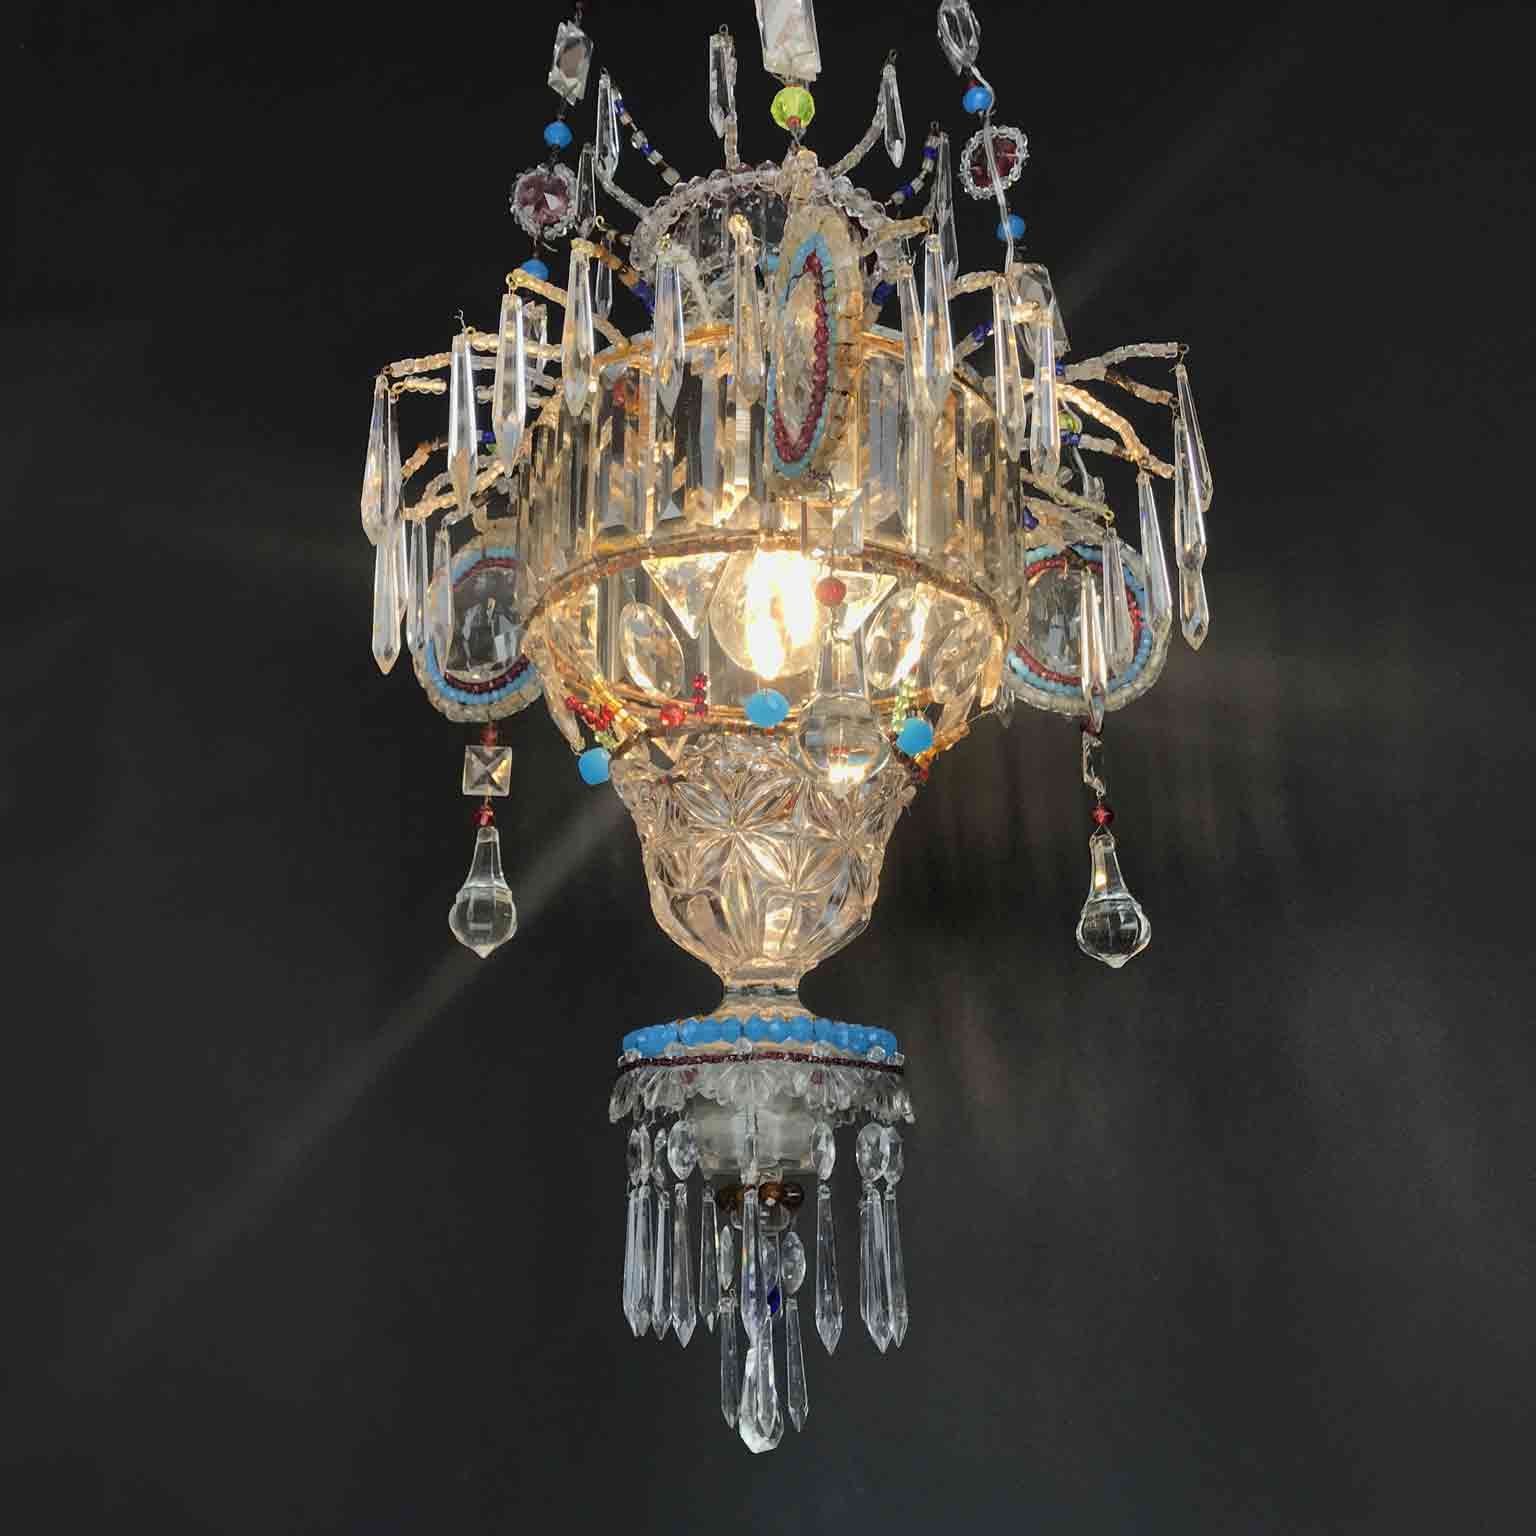 Italian 20th Century Hall Lantern Beaded Crystal And Glass One Light Pendant In Most Recent Italian Crystal Lantern Chandeliers (View 13 of 15)